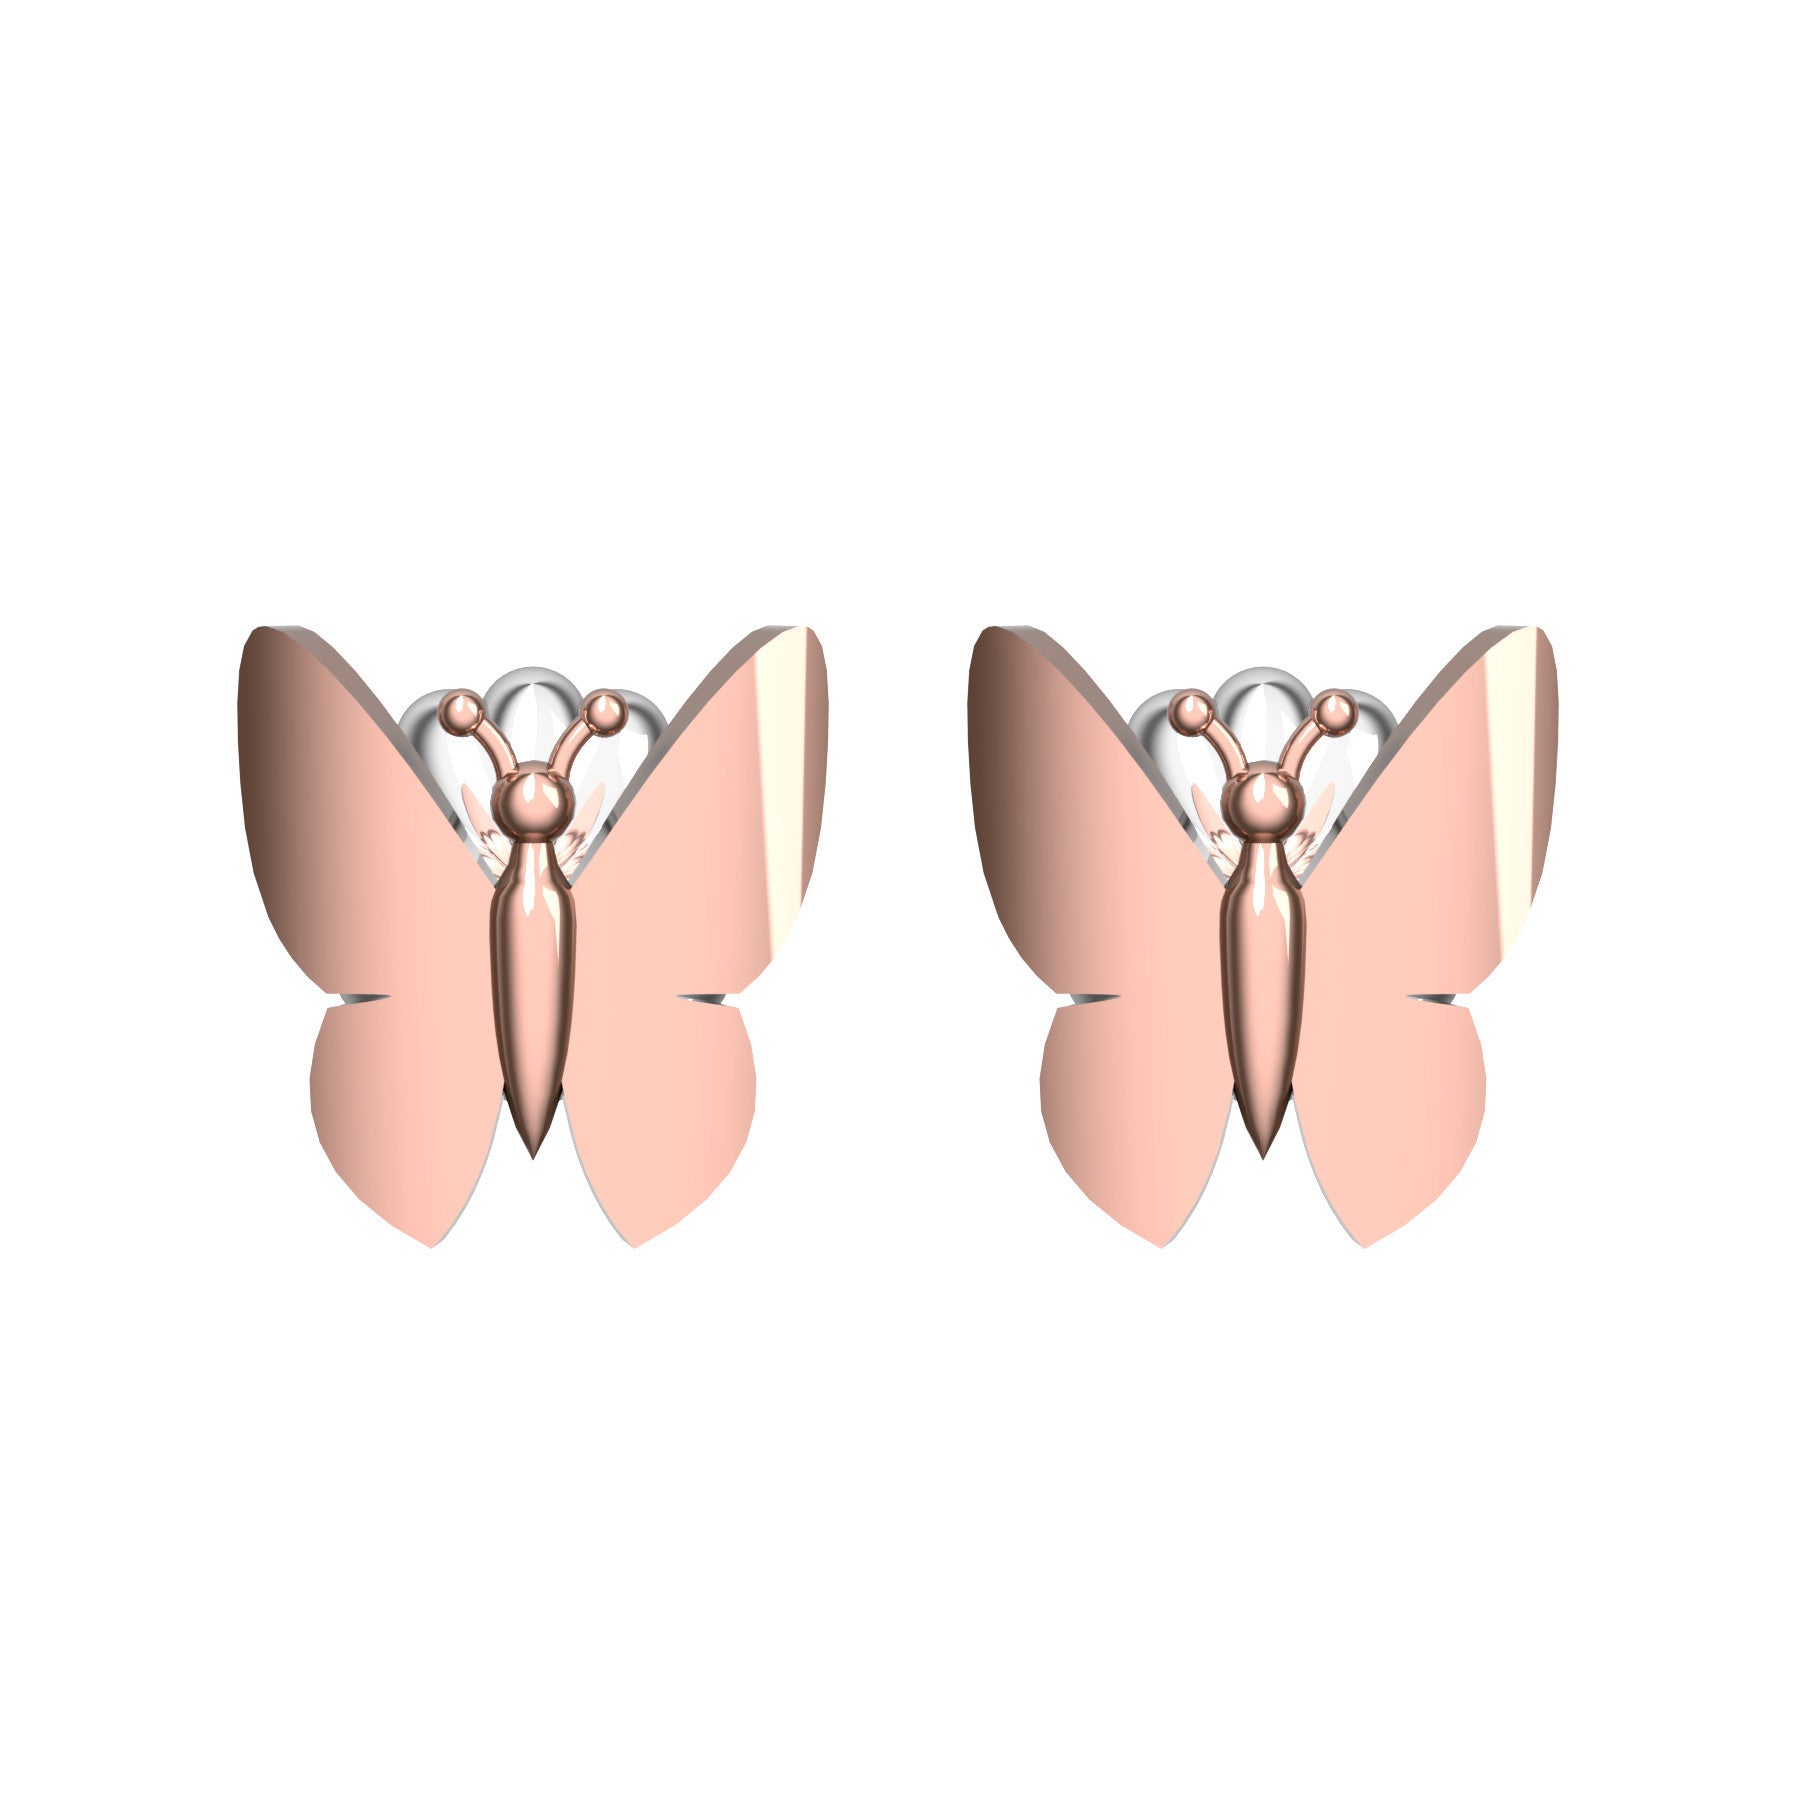 butterfly earrings, 18 K pink gold, weight about 2,4 g (0.08 oz), size 10x9 mm 